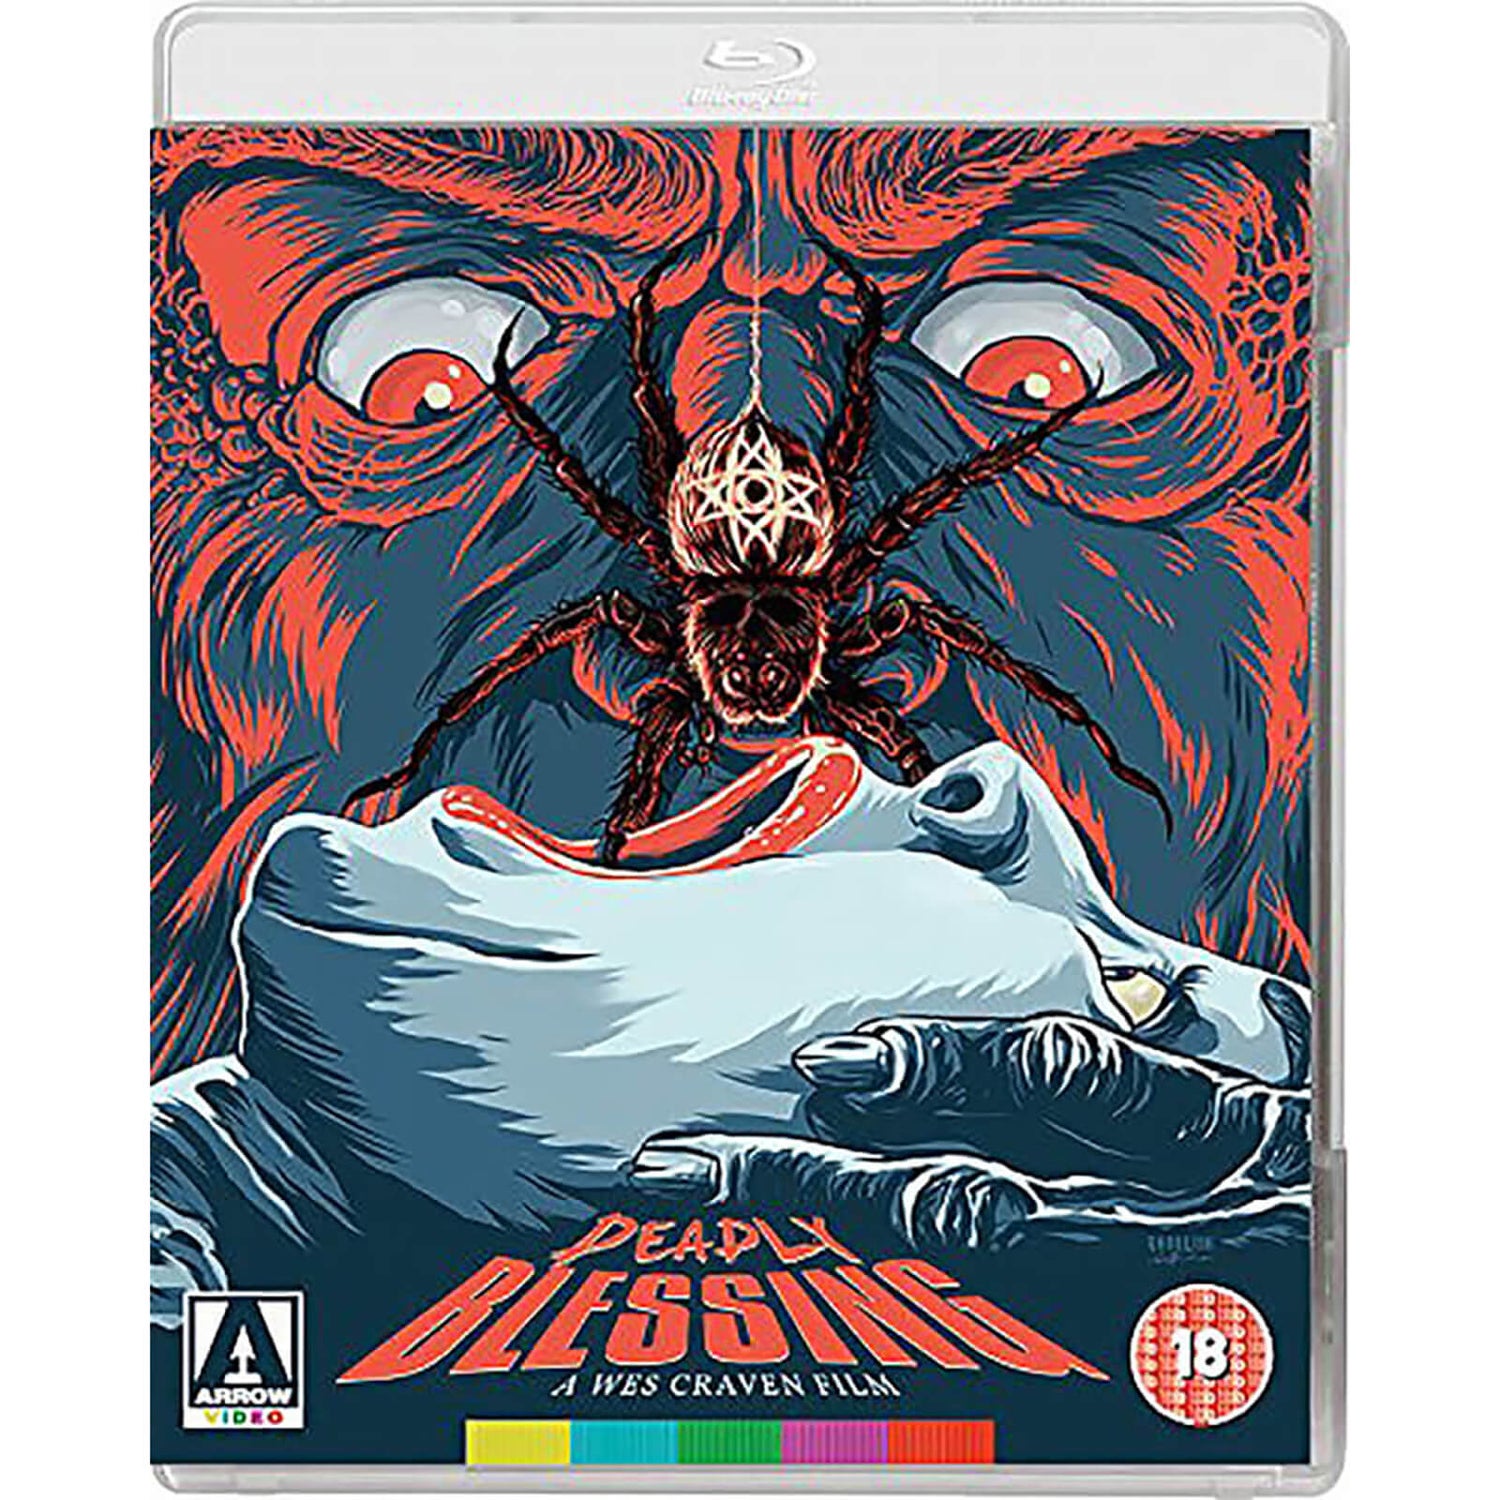 Deadly Blessing Blu-ray